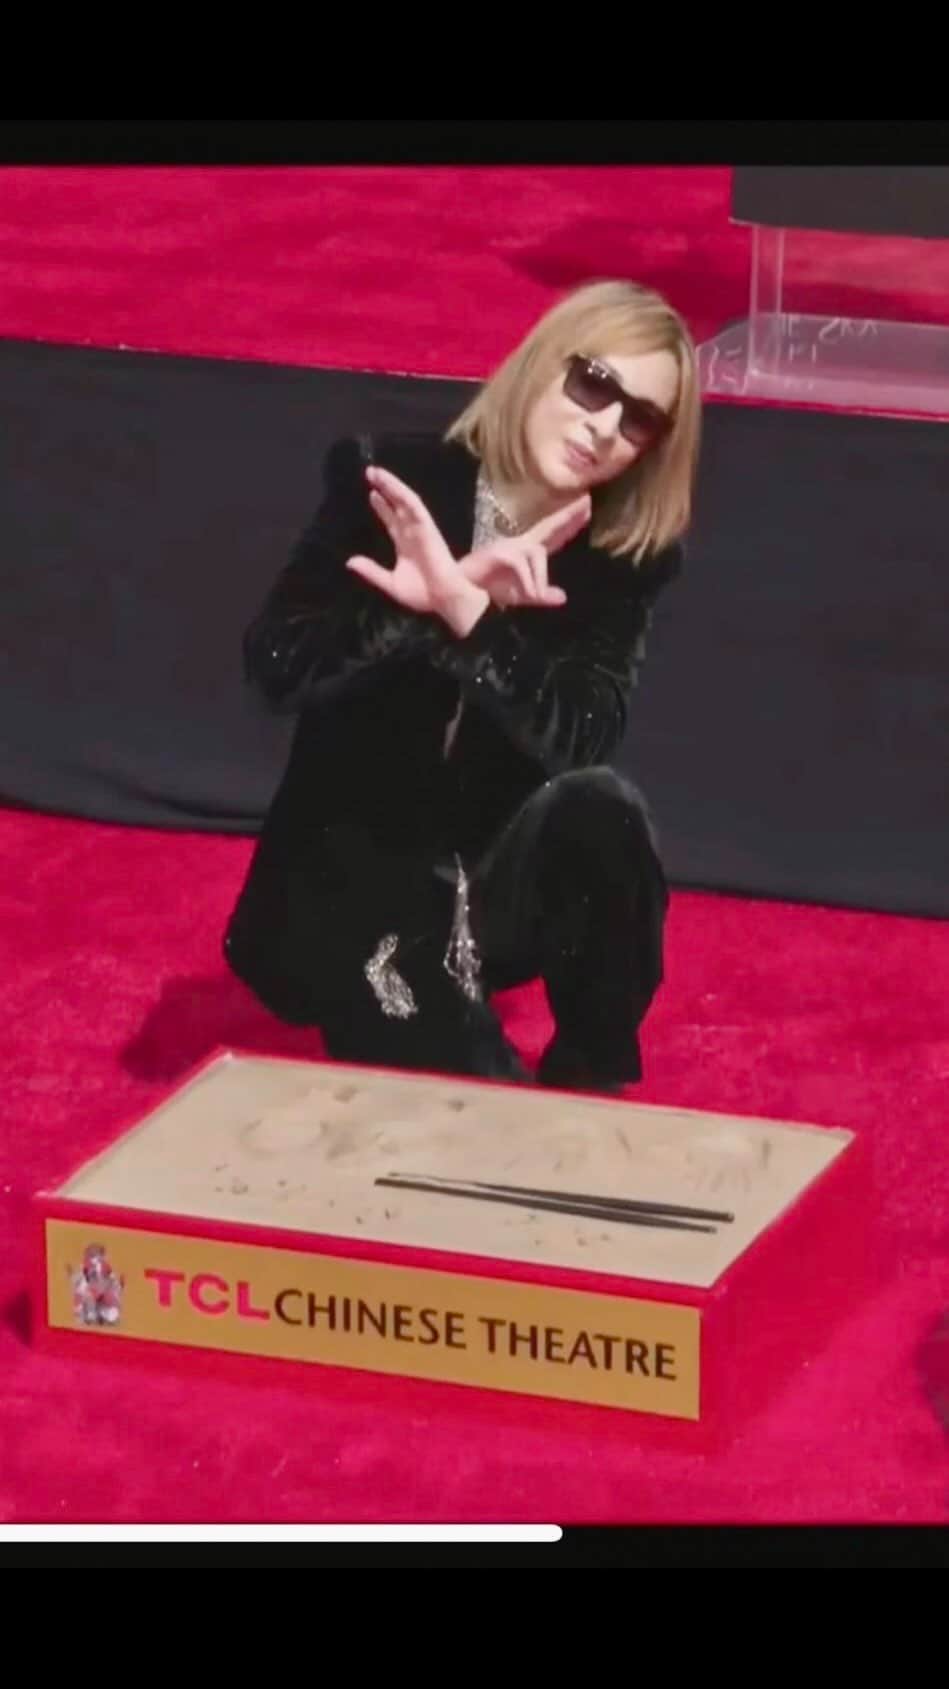 YOSHIKIのインスタグラム：「I felt like I was dreaming yesterday😱 昨日は､夢を見ているようだった。 Yoshiki  “Yoshiki’s legacy, etched in stone – literally. The international superstar has been immortalized in cement at the TCL Chinese Theatre in Hollywood, making history as the first Japanese artist to receive the honor since the tradition began in 1927.” - ABC News  https://abc7.com/yoshiki-tcl-chinese-theatre-hand-prints-hollywood/13787231/  「文字通り、石に刻まれたYOSHIKIの遺産。 国際的スーパースターはハリウッドのTCLチャイニーズ・シアターでセメントで不滅の名を刻まれ、1927年にこの伝統が始まって以来、この栄誉を受け取った初の日本人アーティストとして歴史を刻んだ。」  - ABCニュース  #yoshiki #chinesetheatre #hollywood #tclchinesetheatre #ceremony #xjapan #abcnews   Now come see me live!  Tokyo Garden Theater Oct 7th, 8th, 9th Royal Albert Hall, London Oct 13th Dolby Theater, Los Angeles Oct 20th Carnegie Hall, New York Oct 28th」